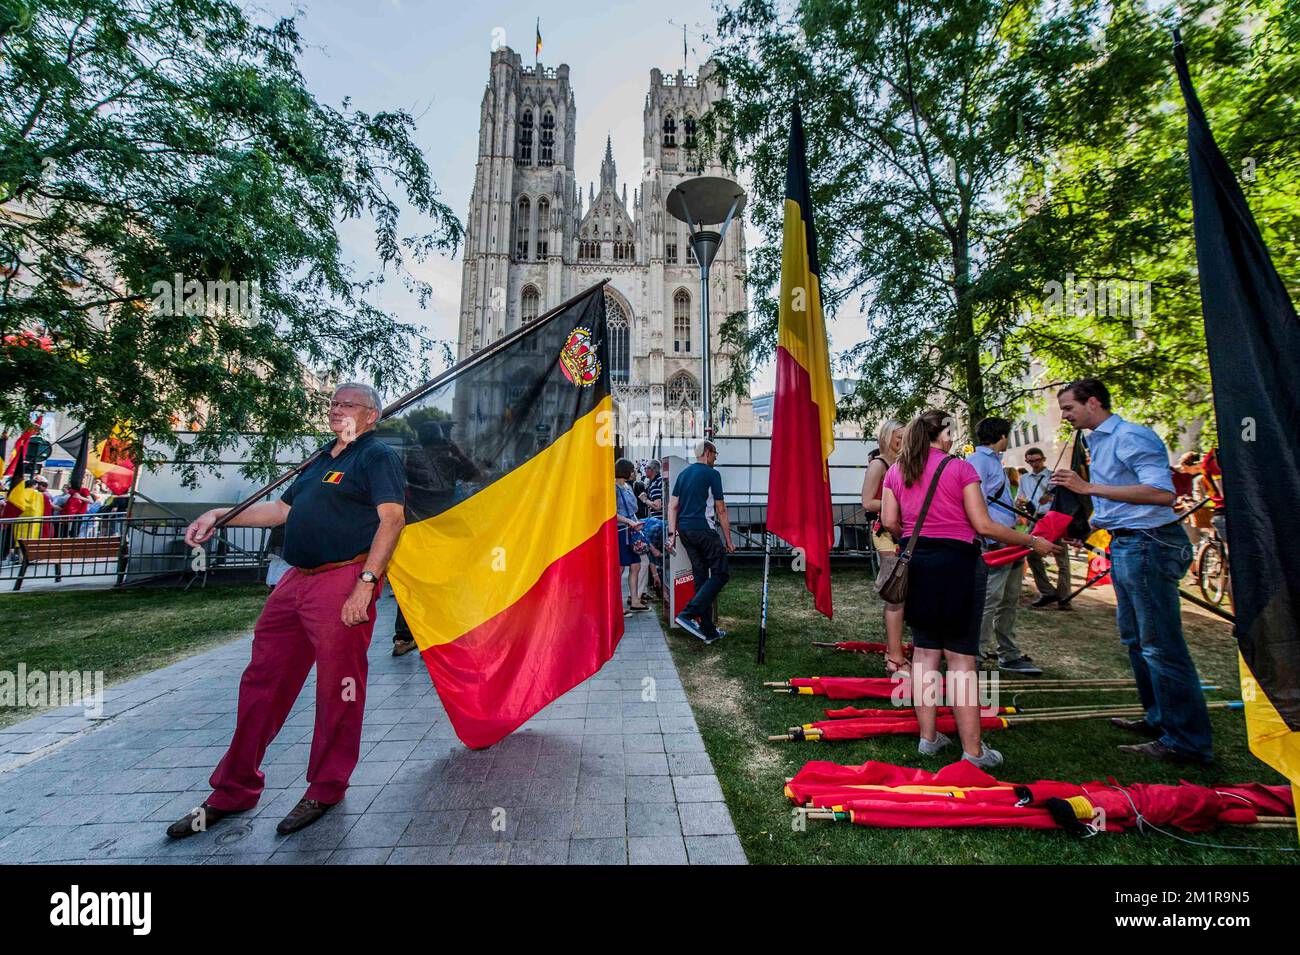 Illustration picture shows royalty fans during celebrations on the Belgian National Day in the city center in Brussels, Sunday 21 July 2013. Today King Albert II abdicated the throne in favour of his son, the new King Philippe - Filip. BELGA PHOTO JONAS ROOSENS Stock Photo